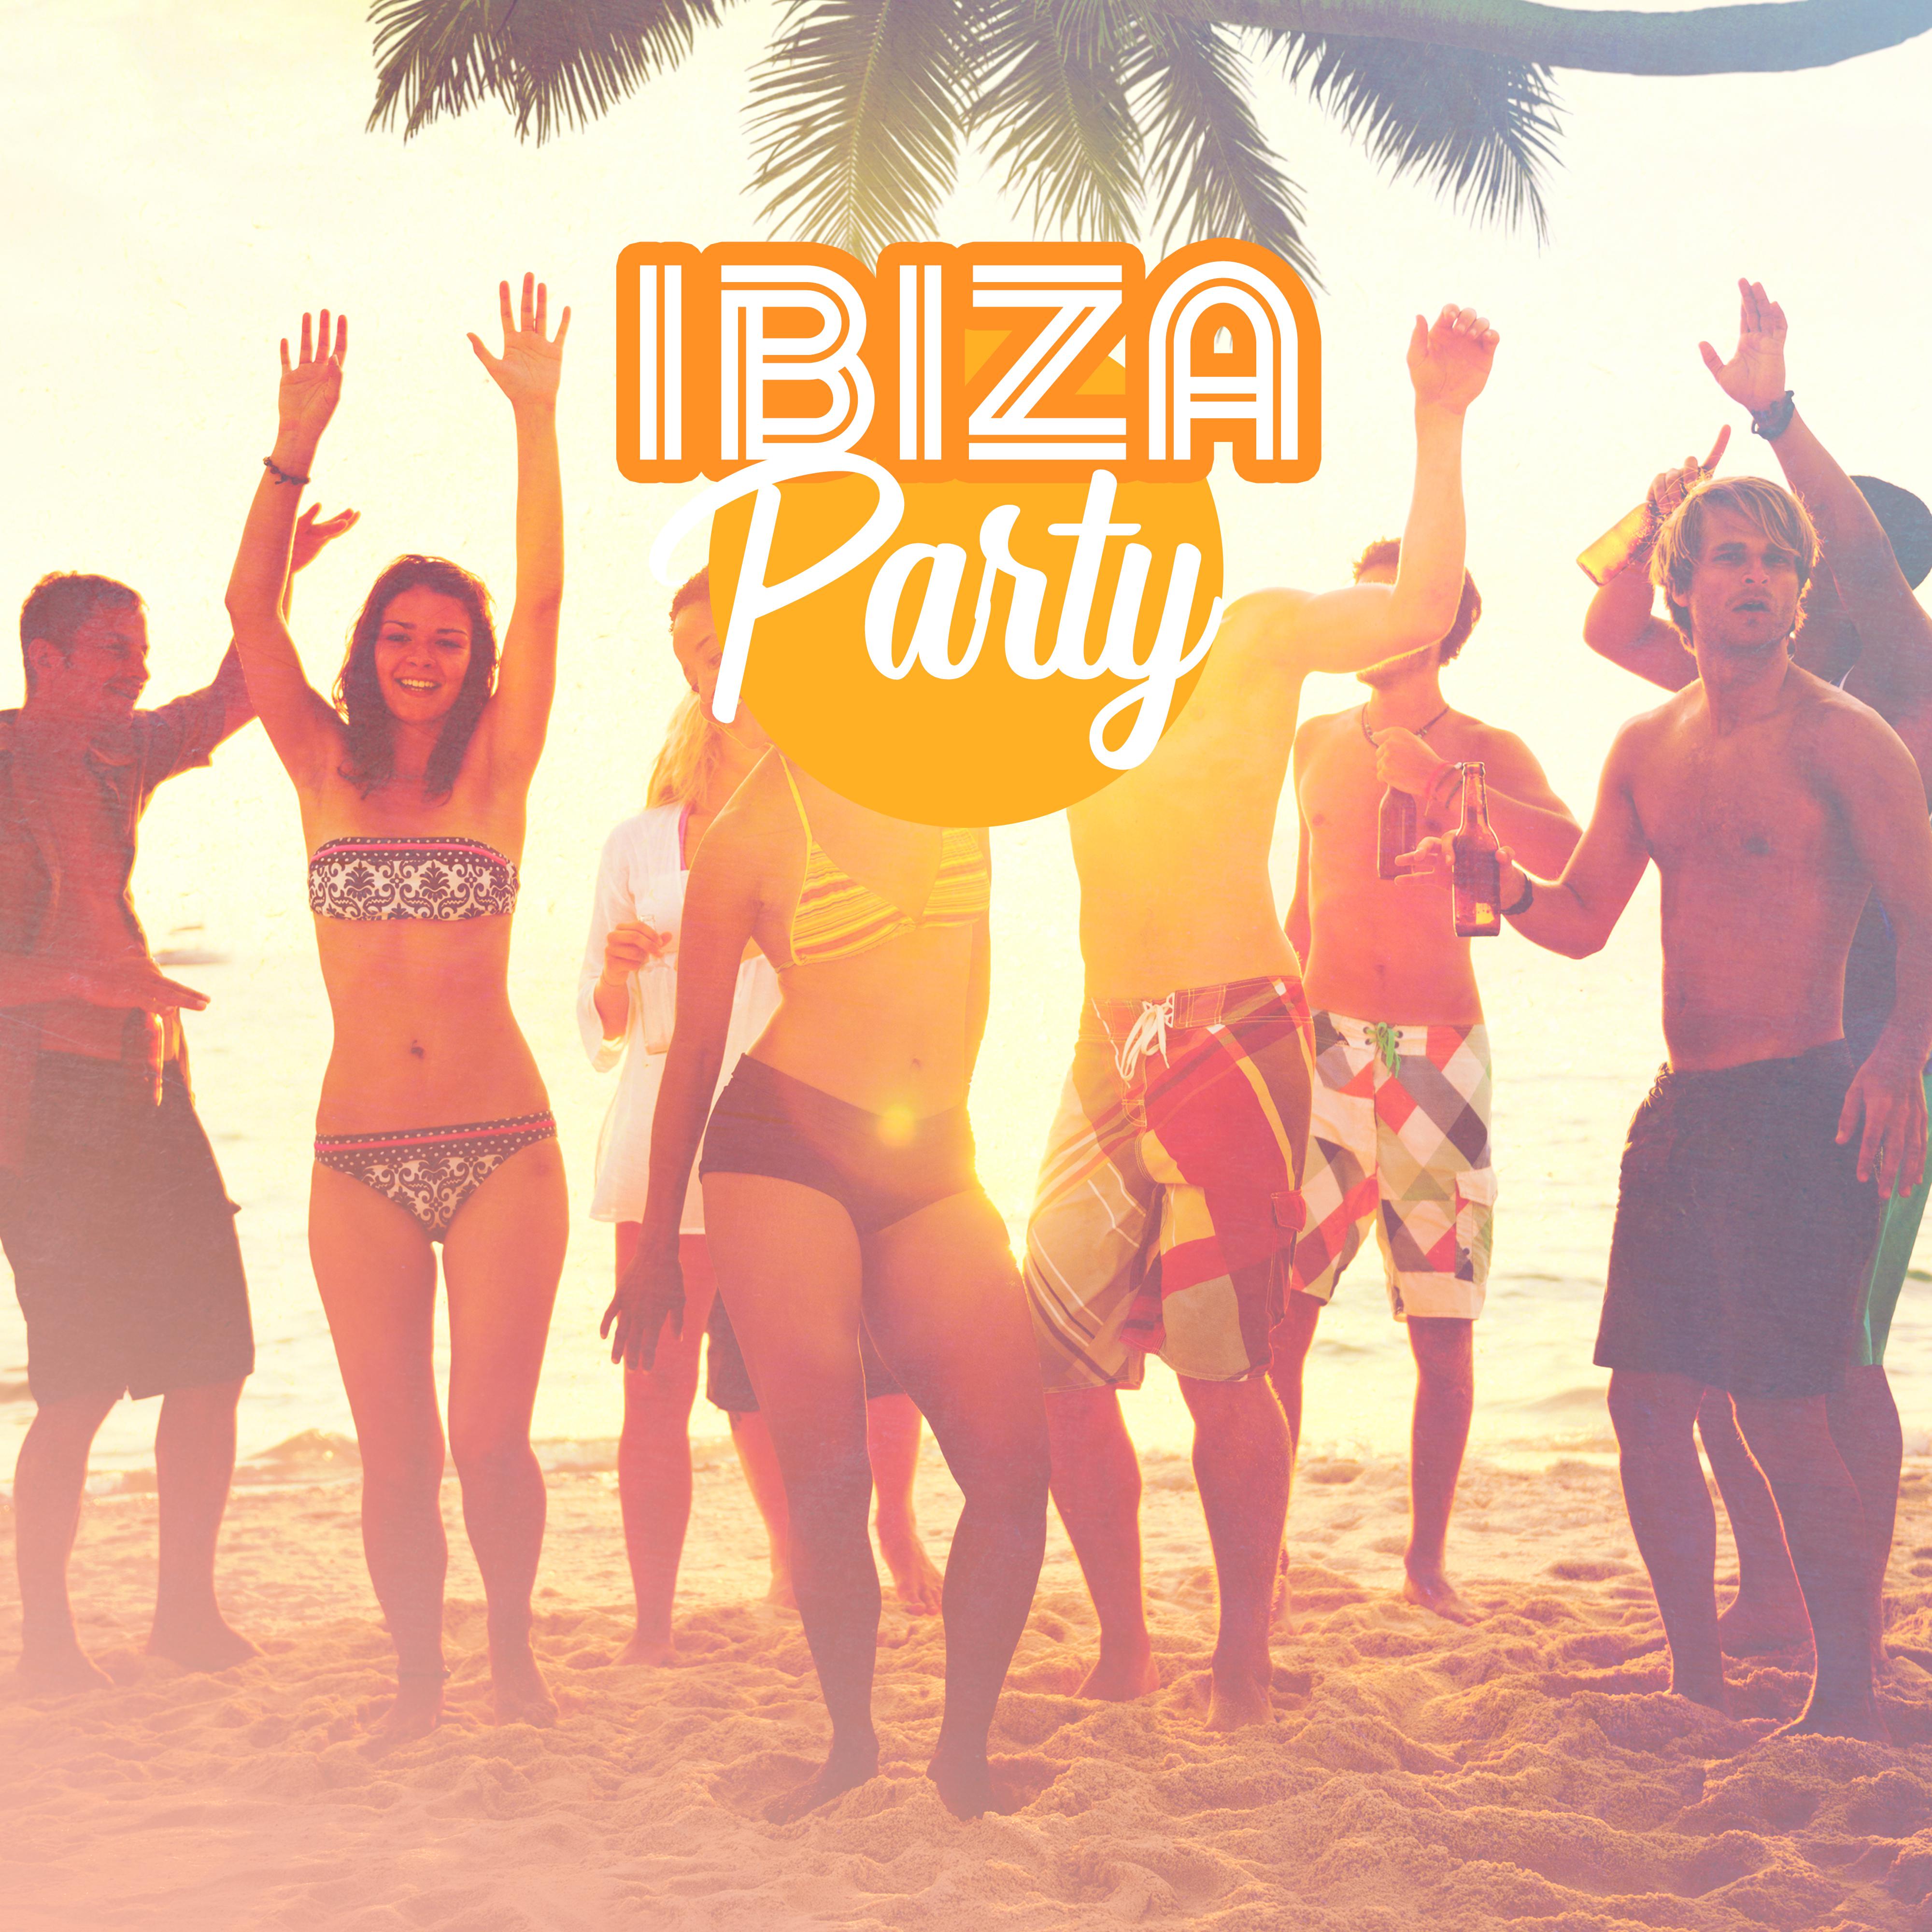 Ibiza Party: **** Vibes, Ibiza Lounge Club, Summer Hits, Beach Chillout, Relax, Dance Mix, Lounge Music